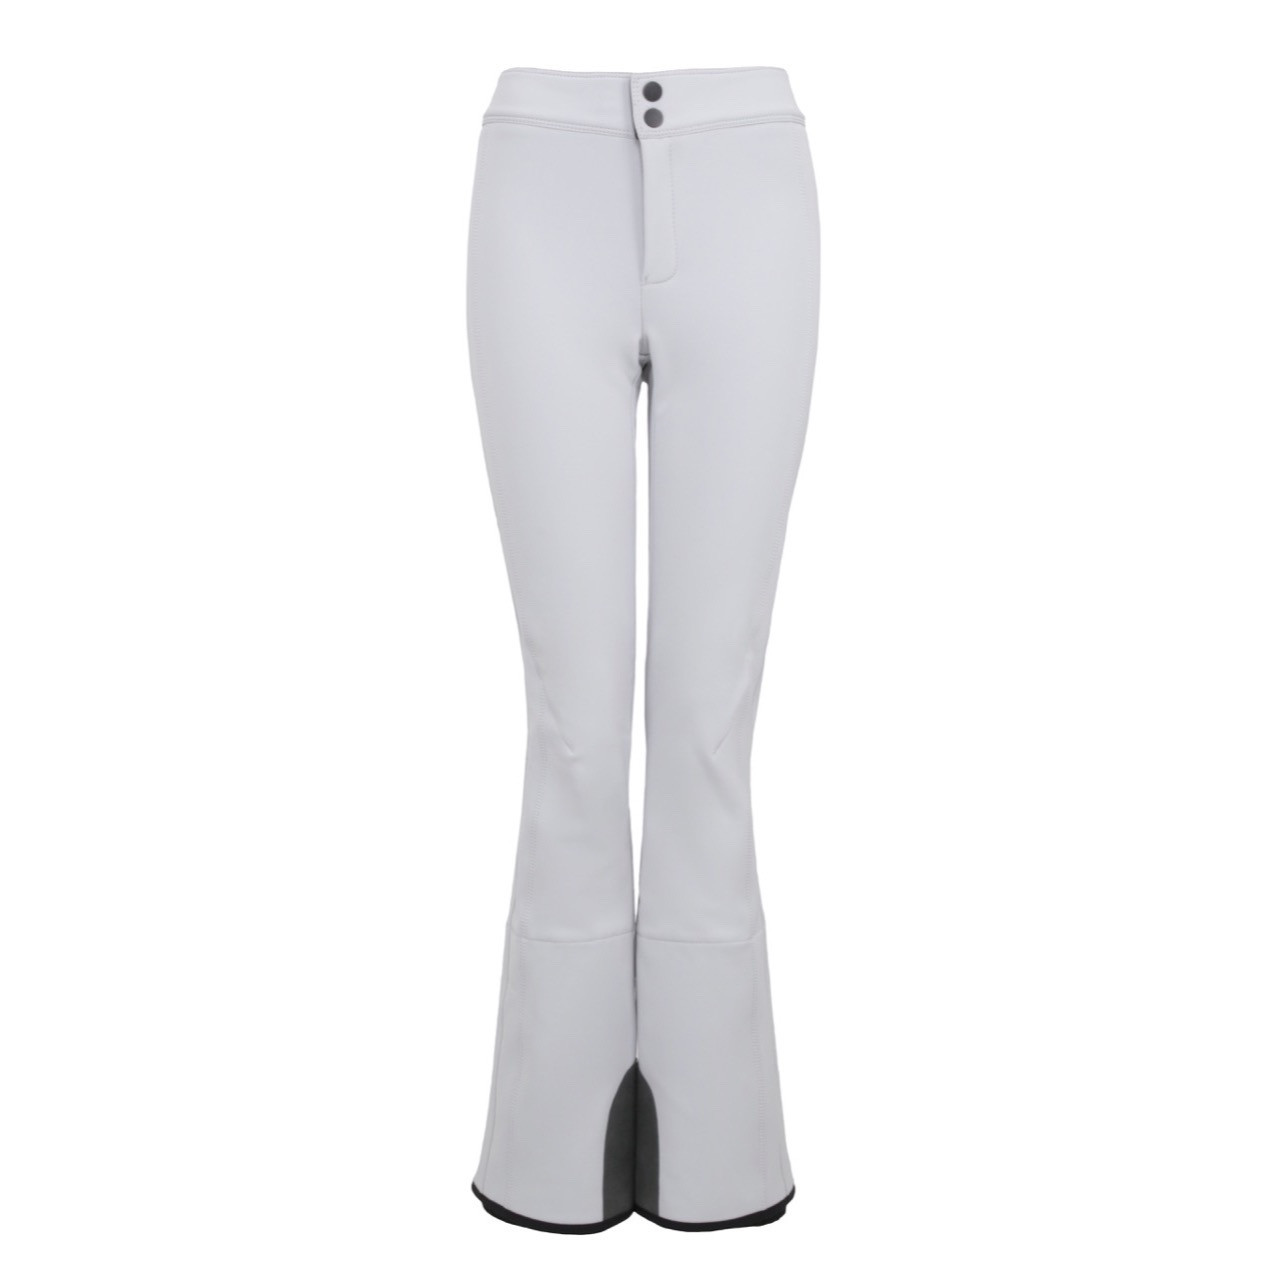 with White Stripes_Womens Stretch ski Pants_Pants for Women_Womens